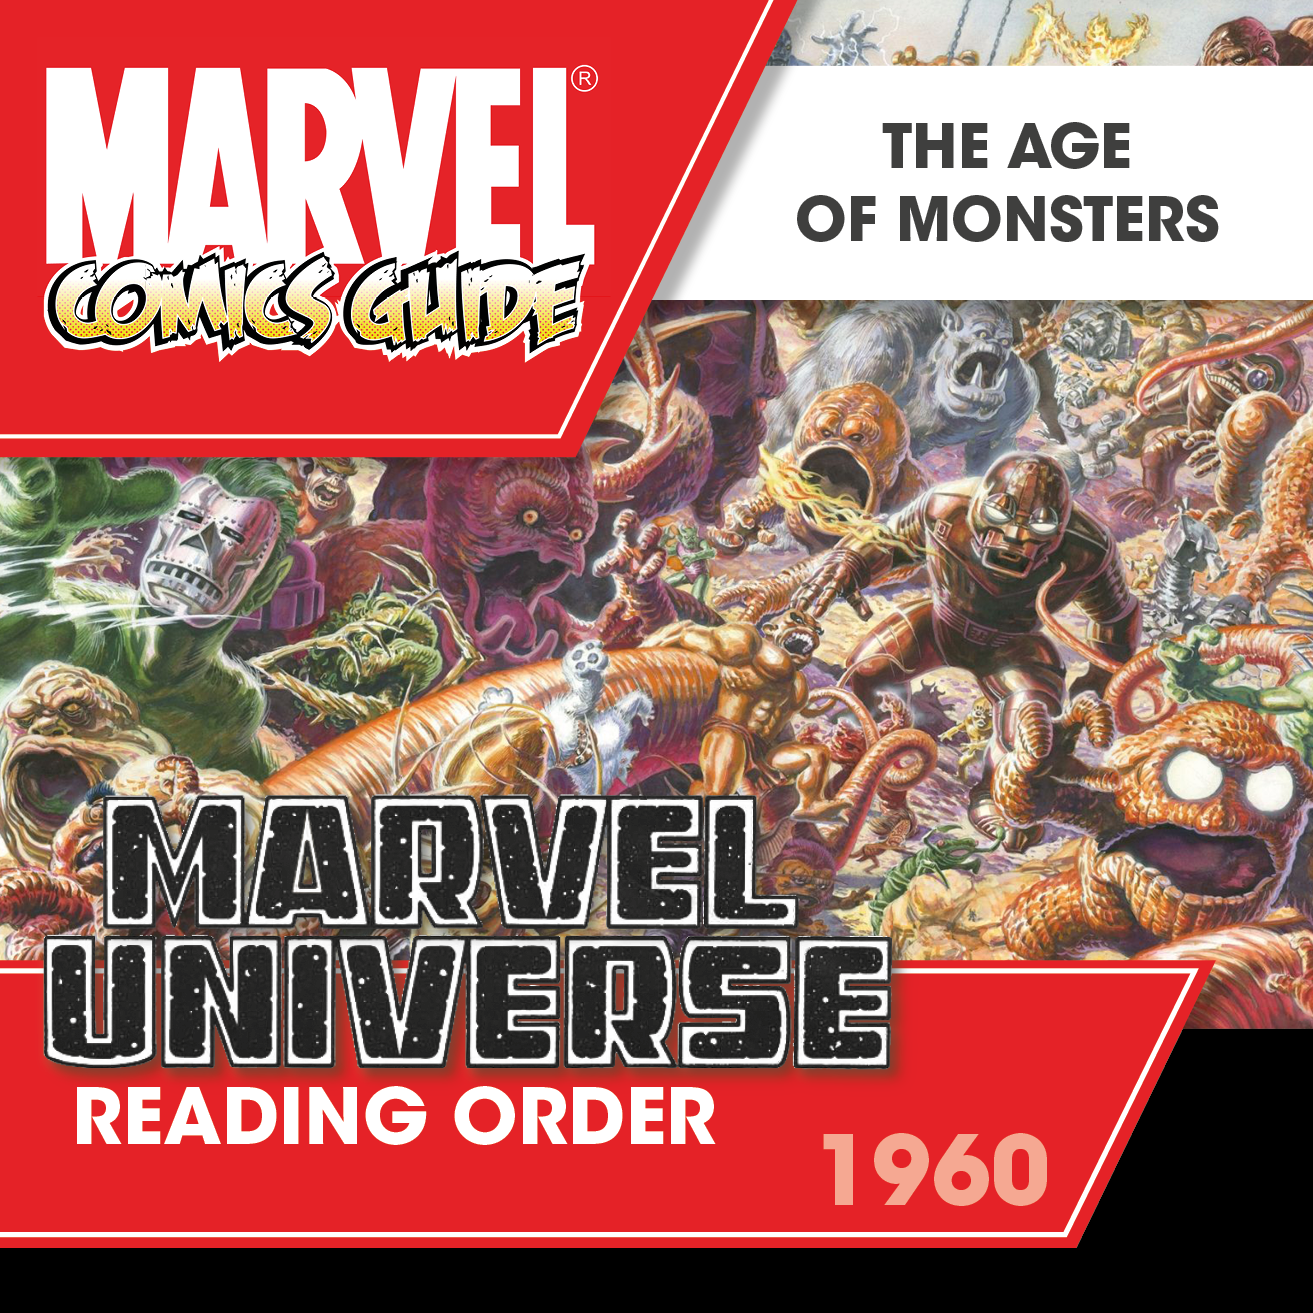 Regaño lotería Definitivo The Marvel Comics Guide: MARVEL UNIVERSE: 1960 READING ORDER - The Age of  Monsters